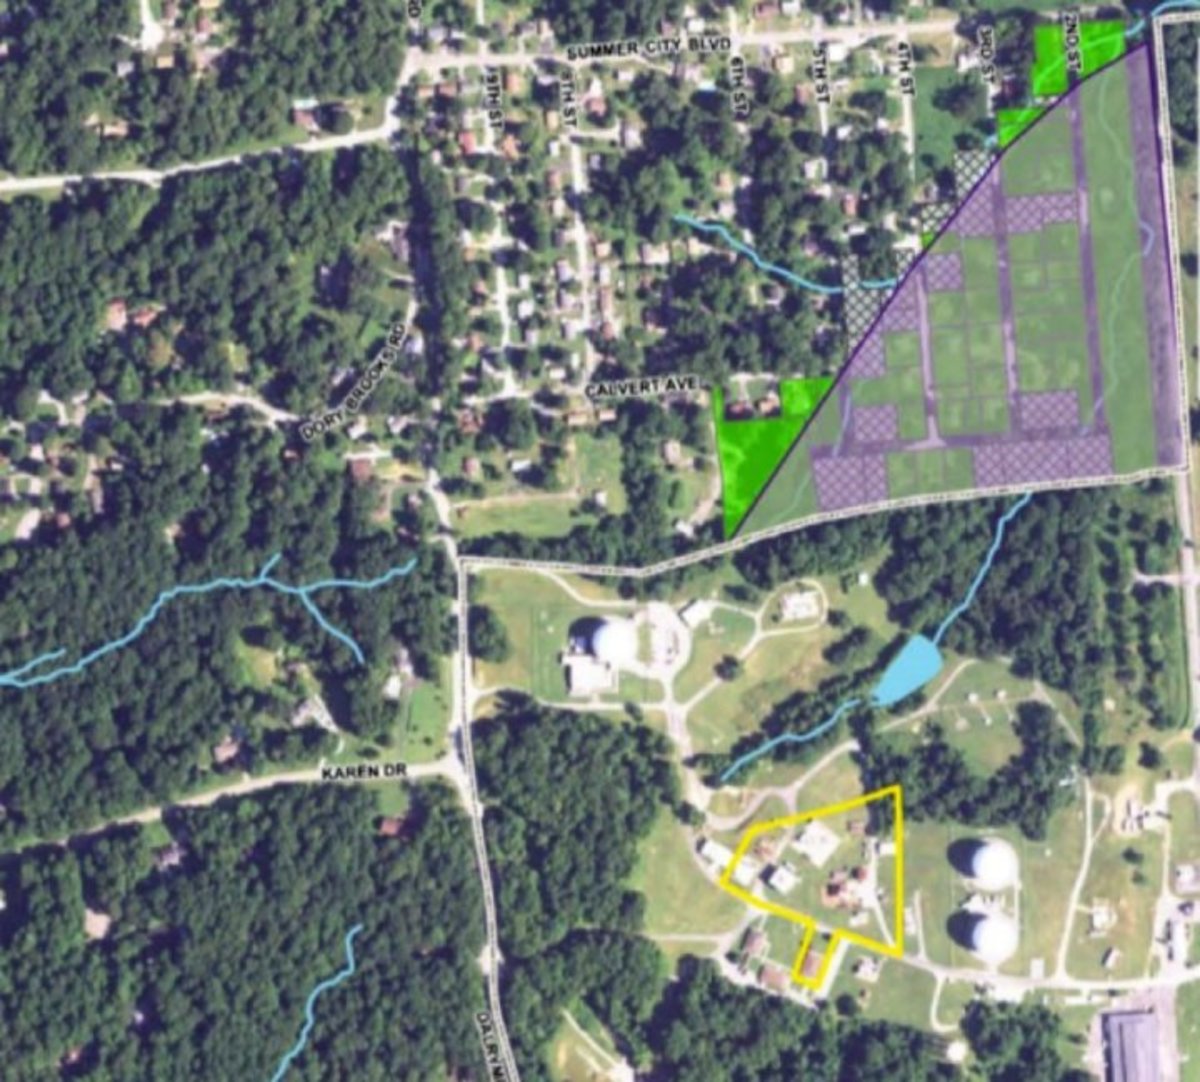 Although carcinogenic plumes may travel for miles, the Navy did not test private wells just 1,000 feet from the burn area. The testing area is shown in the green triangle. The burn area is shown in yellow.